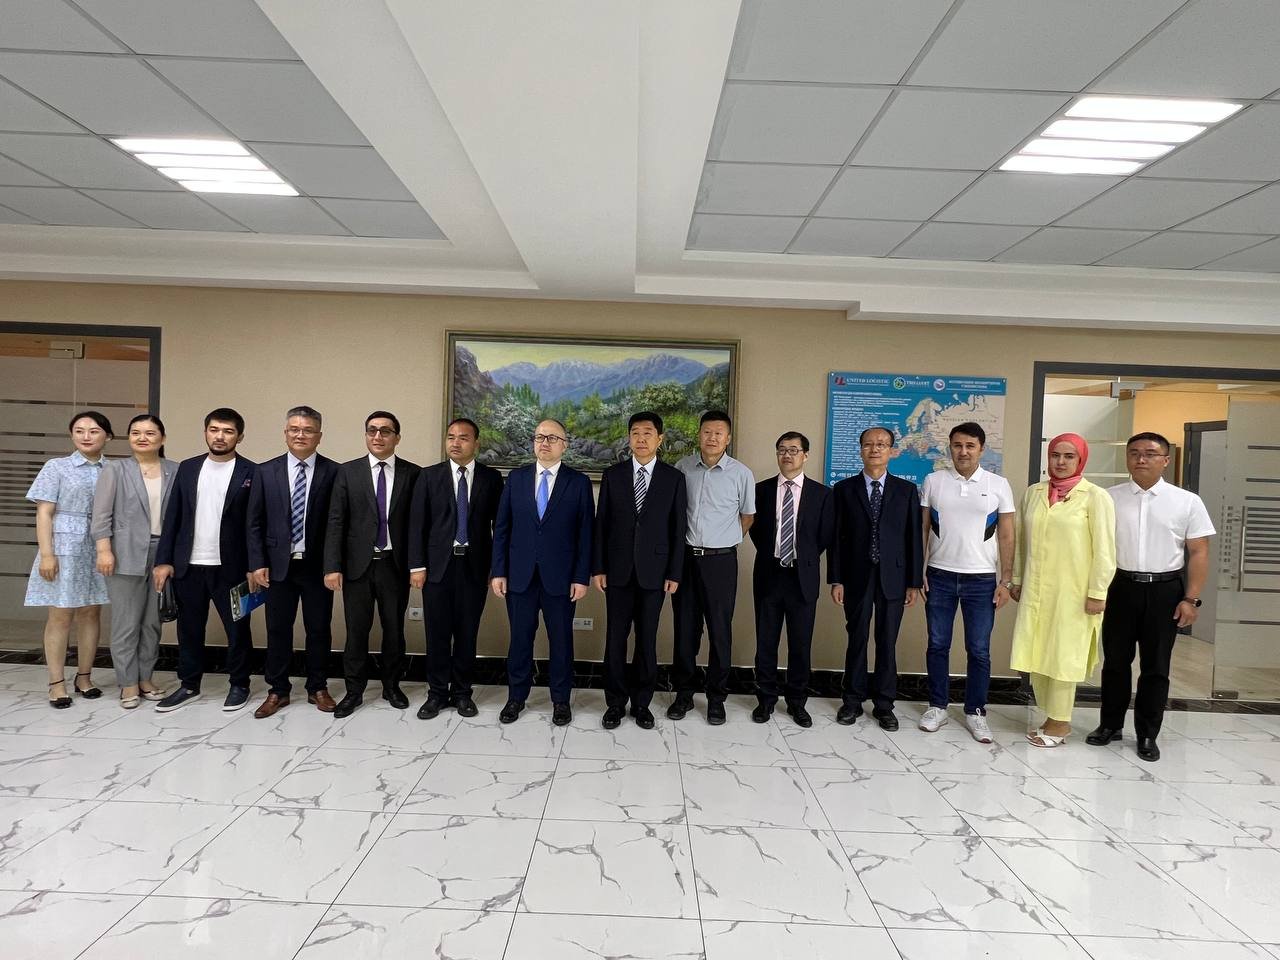 Today, the Assembly of Economy of Uzbekistan was visited by a delegation led by a representative of the leadership of the PRC, a member of the party I Xong Da